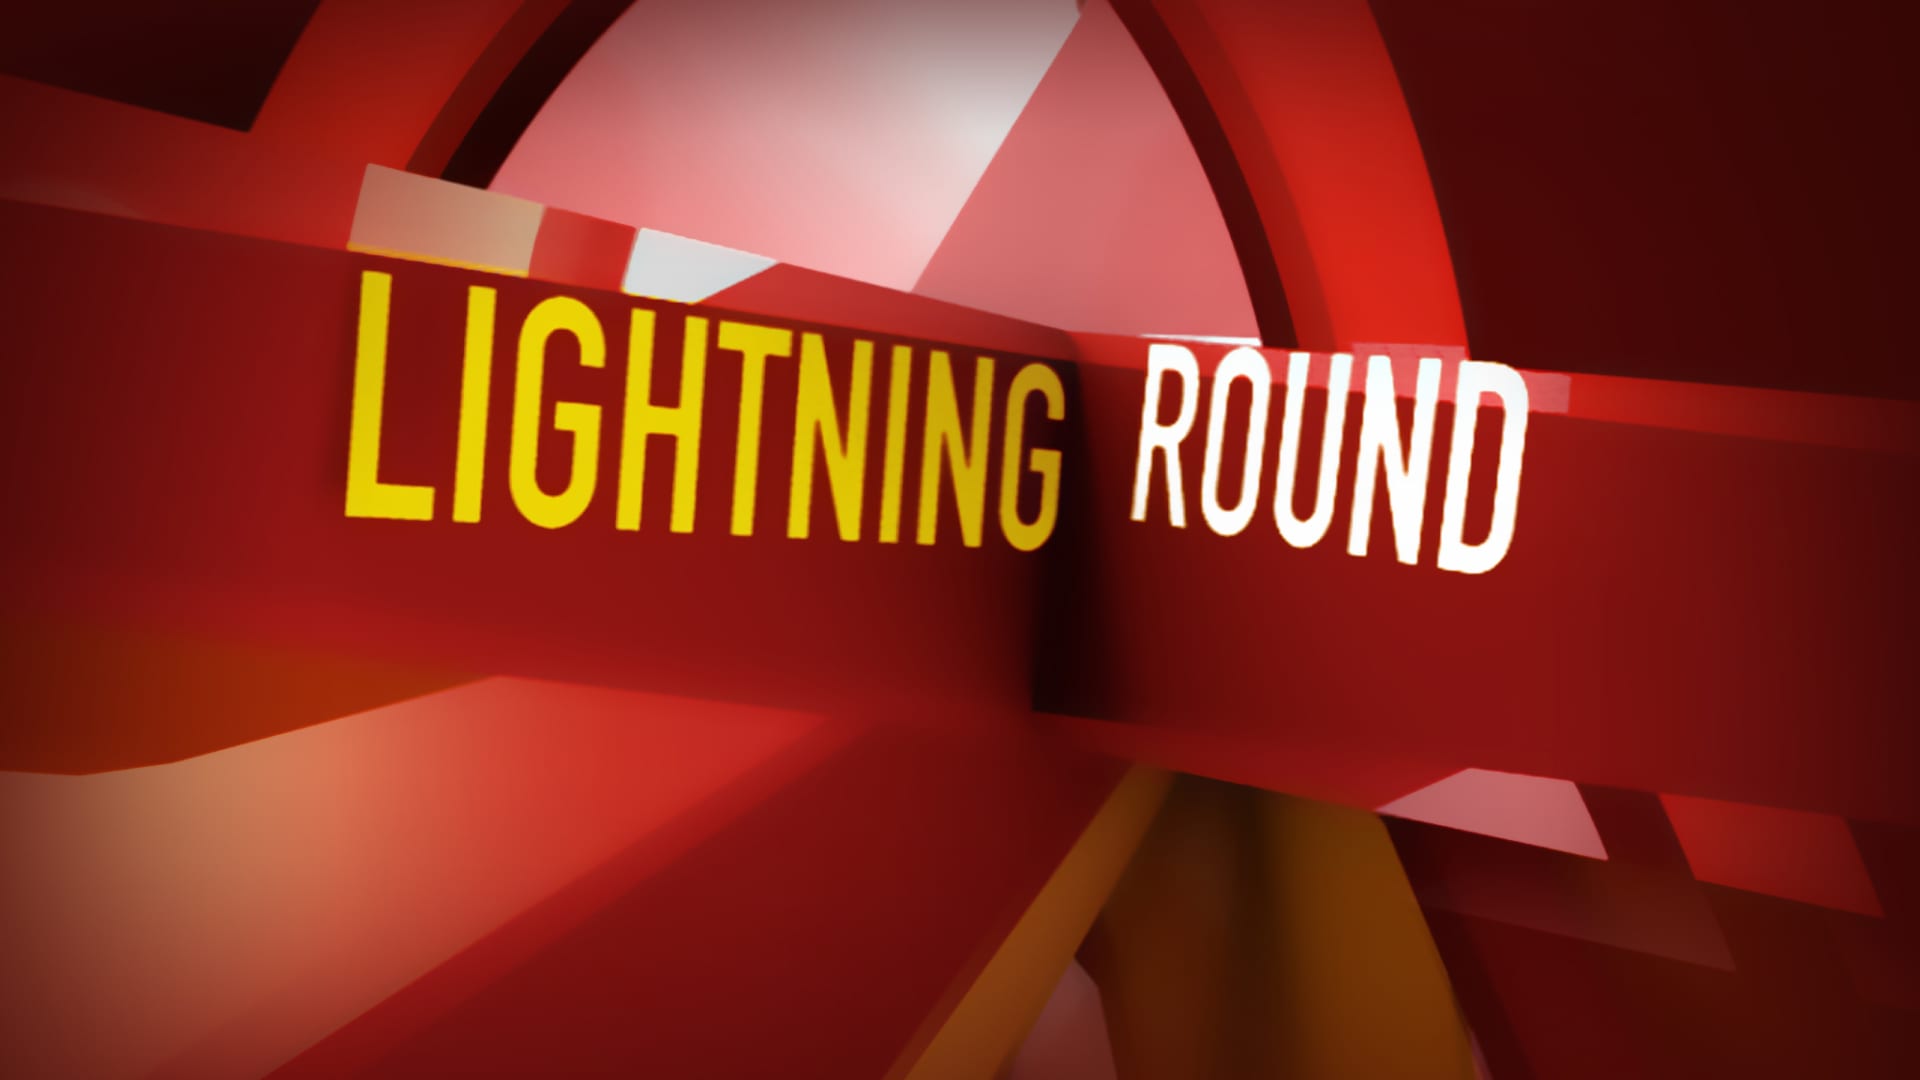 Cramer’s lightning round: I like Advanced Micro Devices over Micron